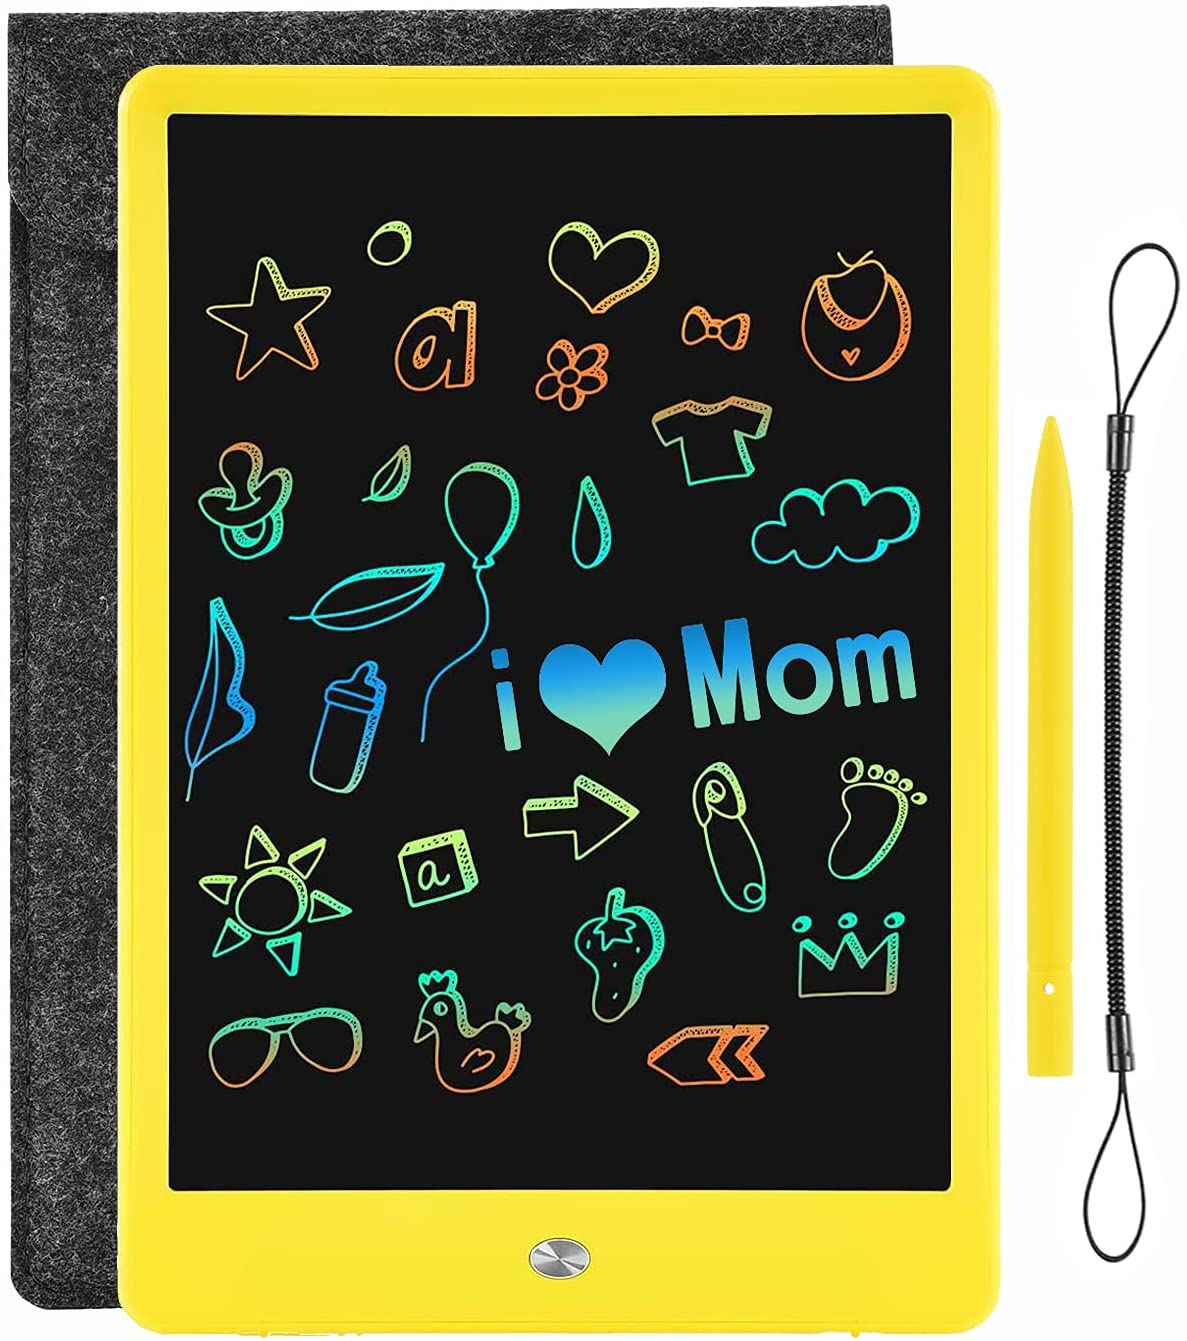 Mini Magnetic Drawing Board for Kids - Game Prizes and Classrooms Pack of 12 Erasable Doodle Sketch Tablet and Travel Writing Pad for Kids and Toddlers Birthday Party Favors Boys and Girls 